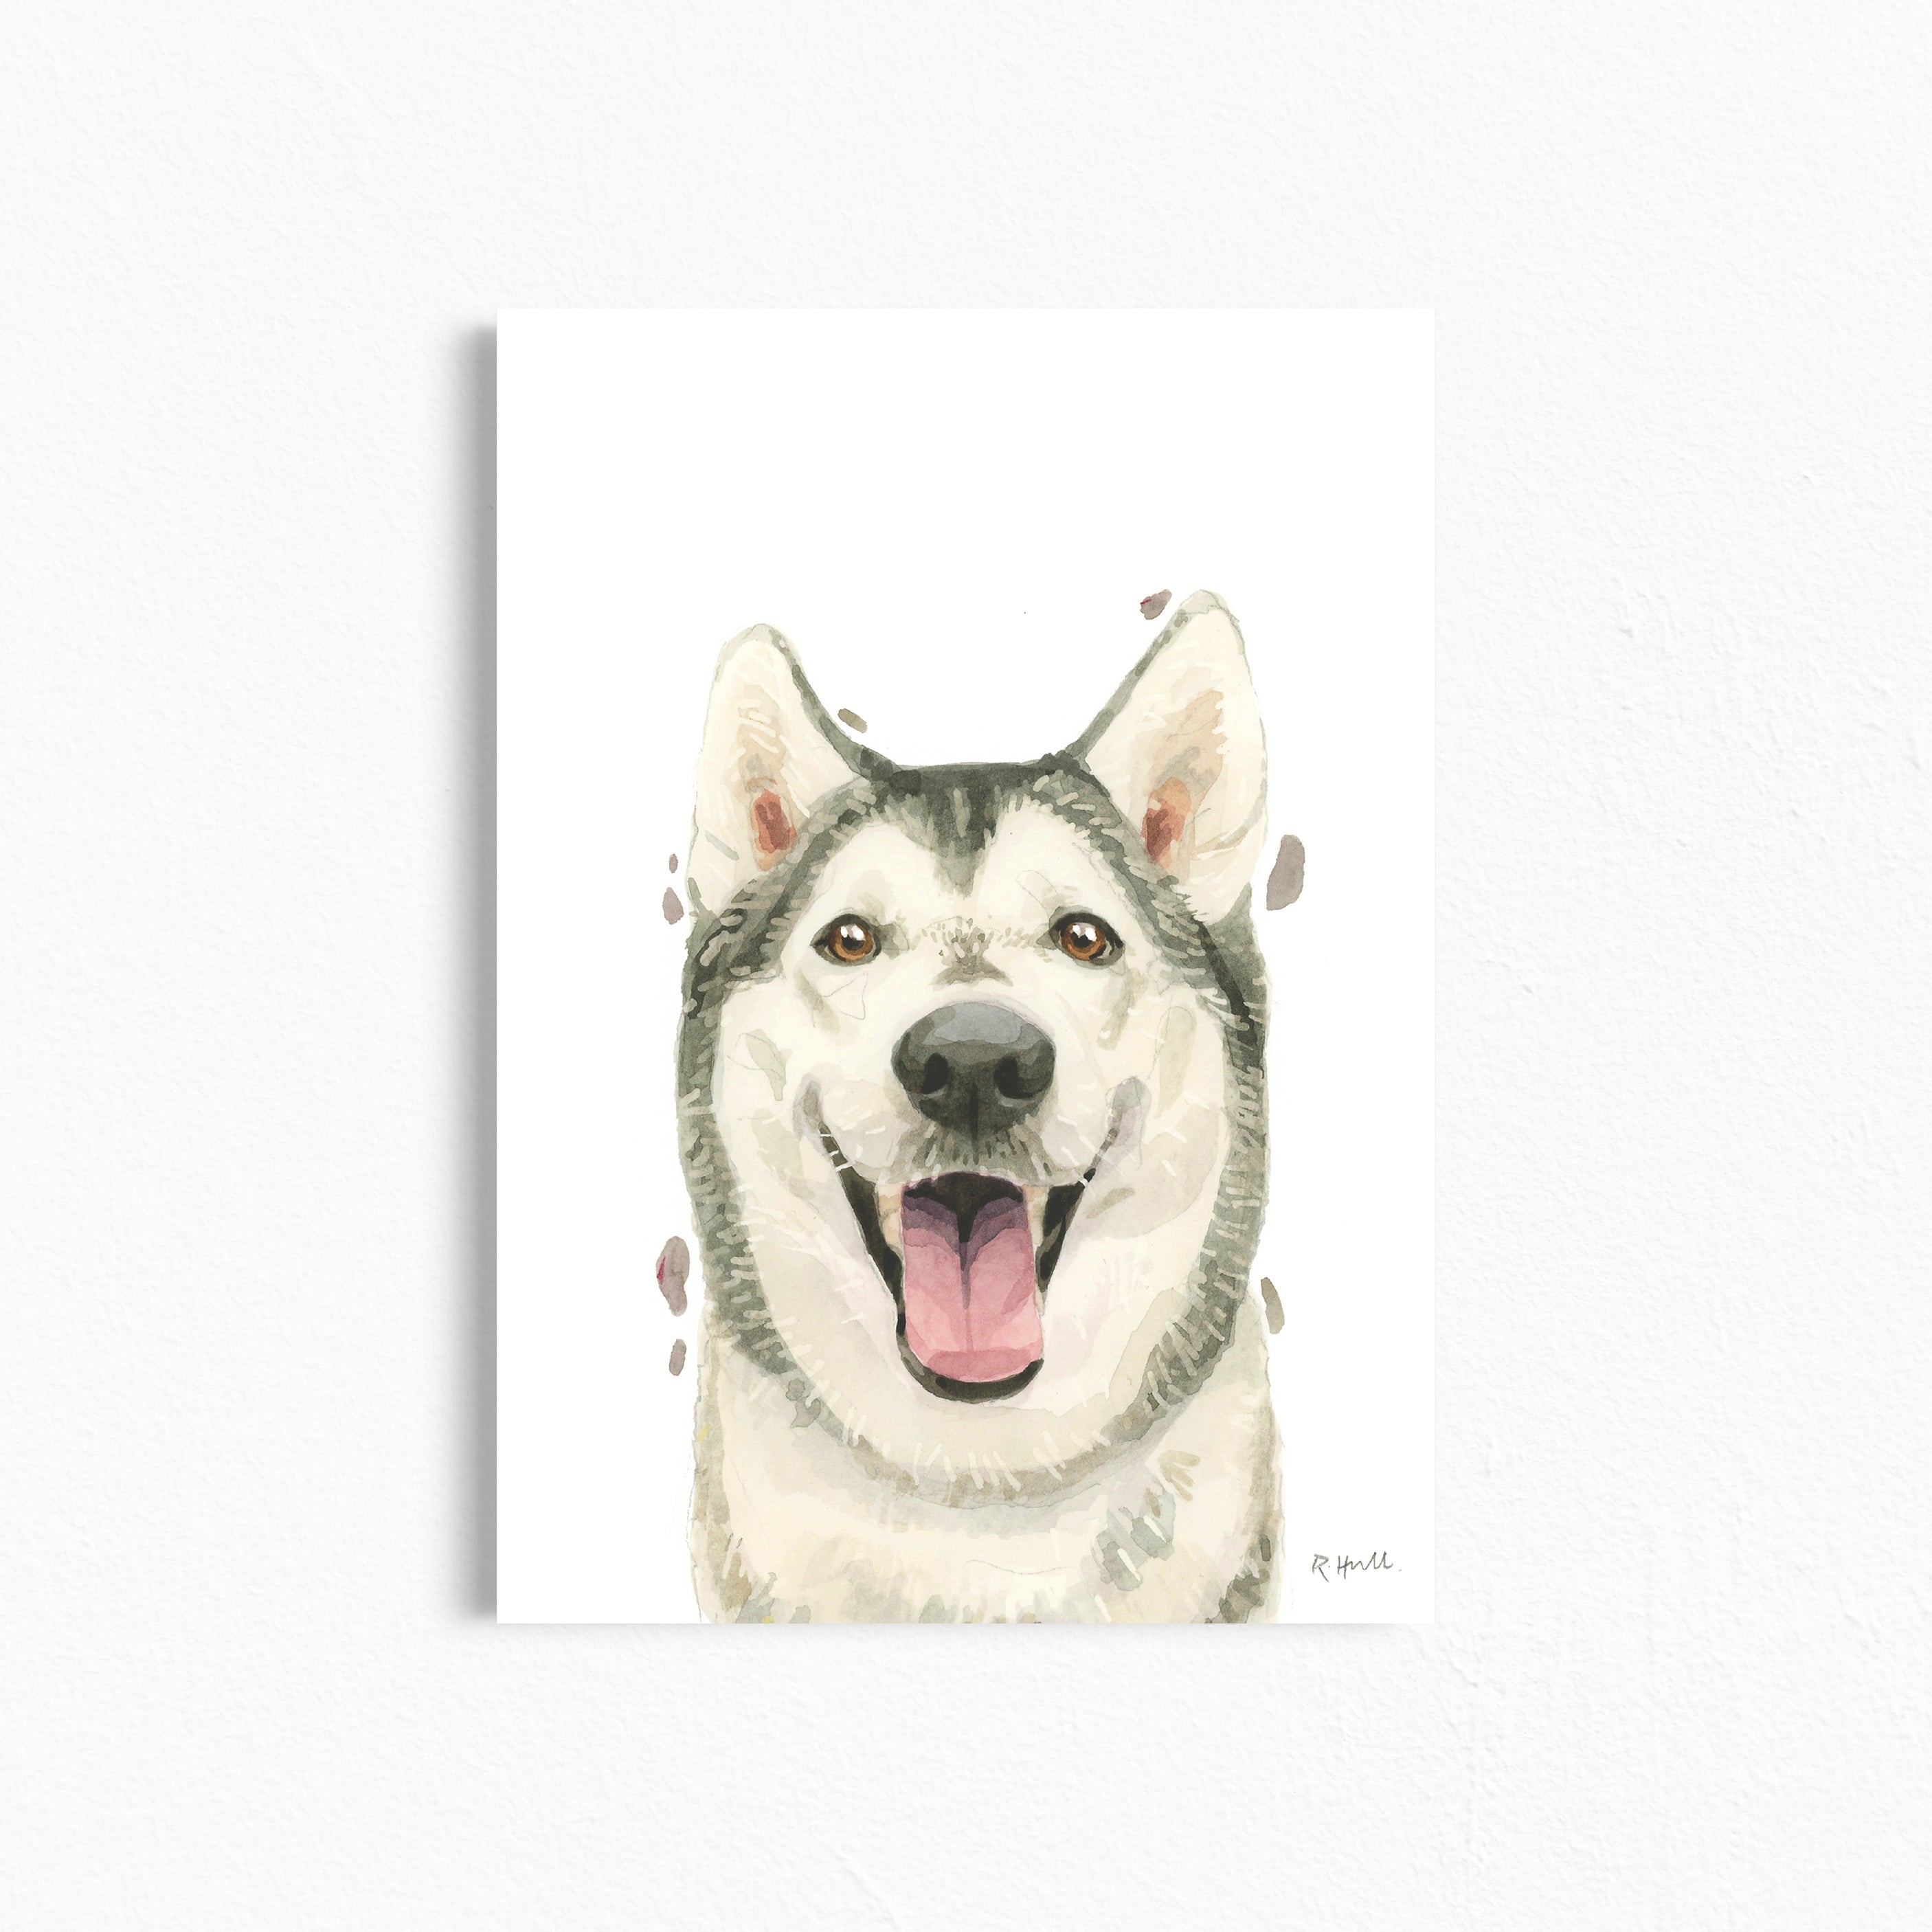 Buy Siberian Husky Dog Breed Smiling Puppy Animal Pet Hound Online in India   Etsy